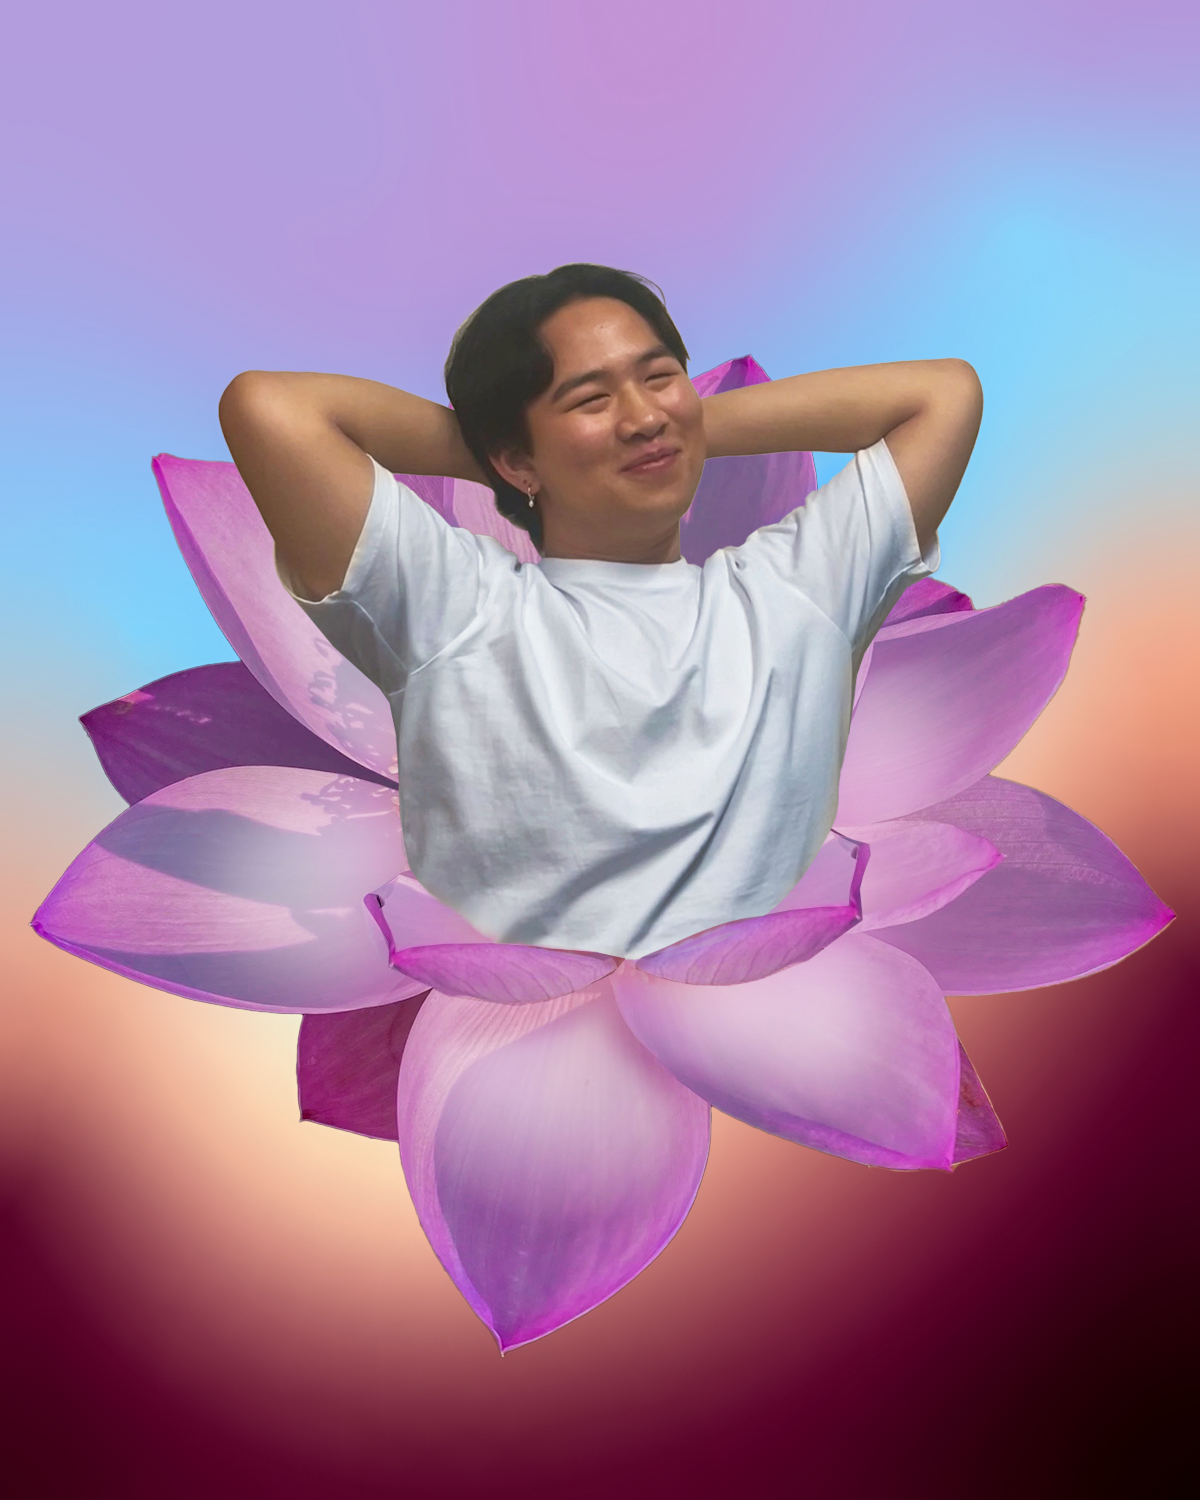 An edited photograph of Jericho, a person with brown skin and short black hair smiling with their hands tucked behind their head. They are emerging from a pink lotus flower. Behind them is a gradient of color ranging from brown to white to blue to purple.